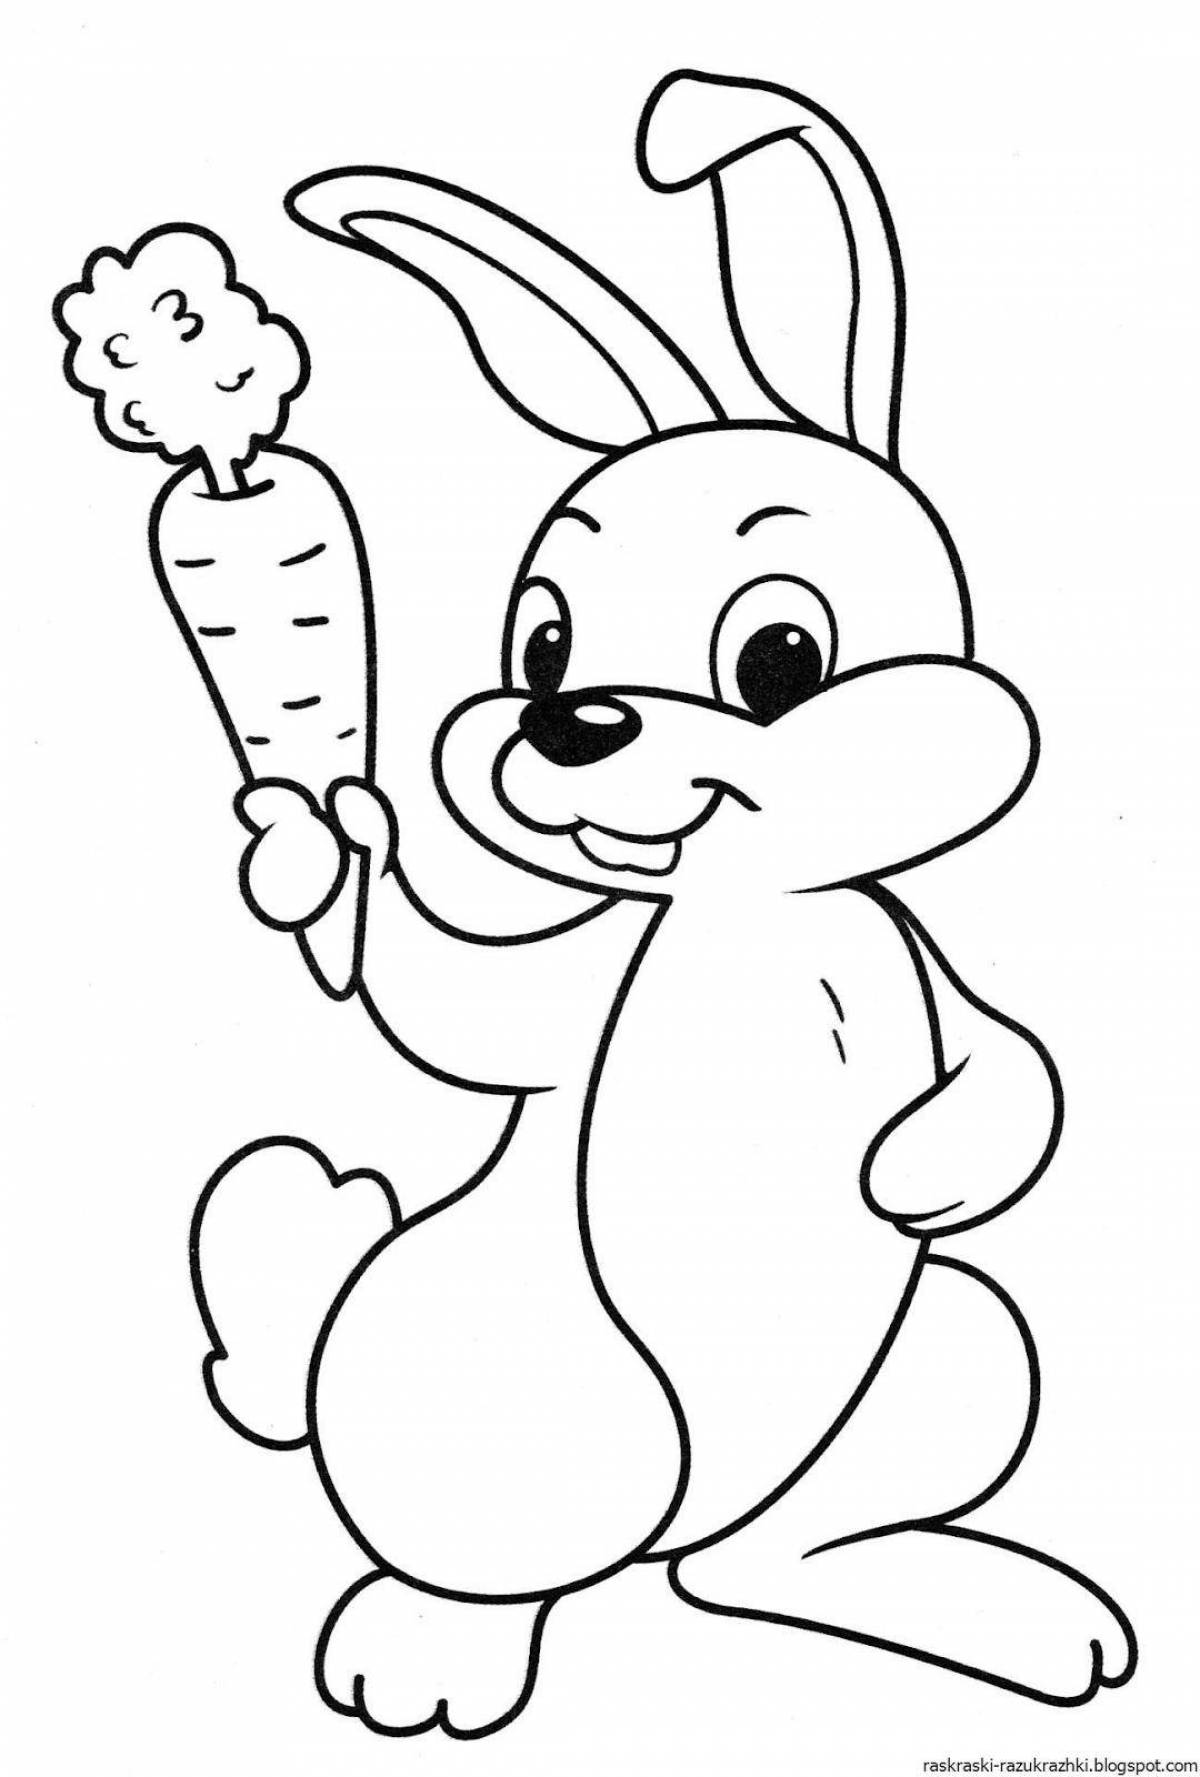 Fancy coloring rabbit with carrots